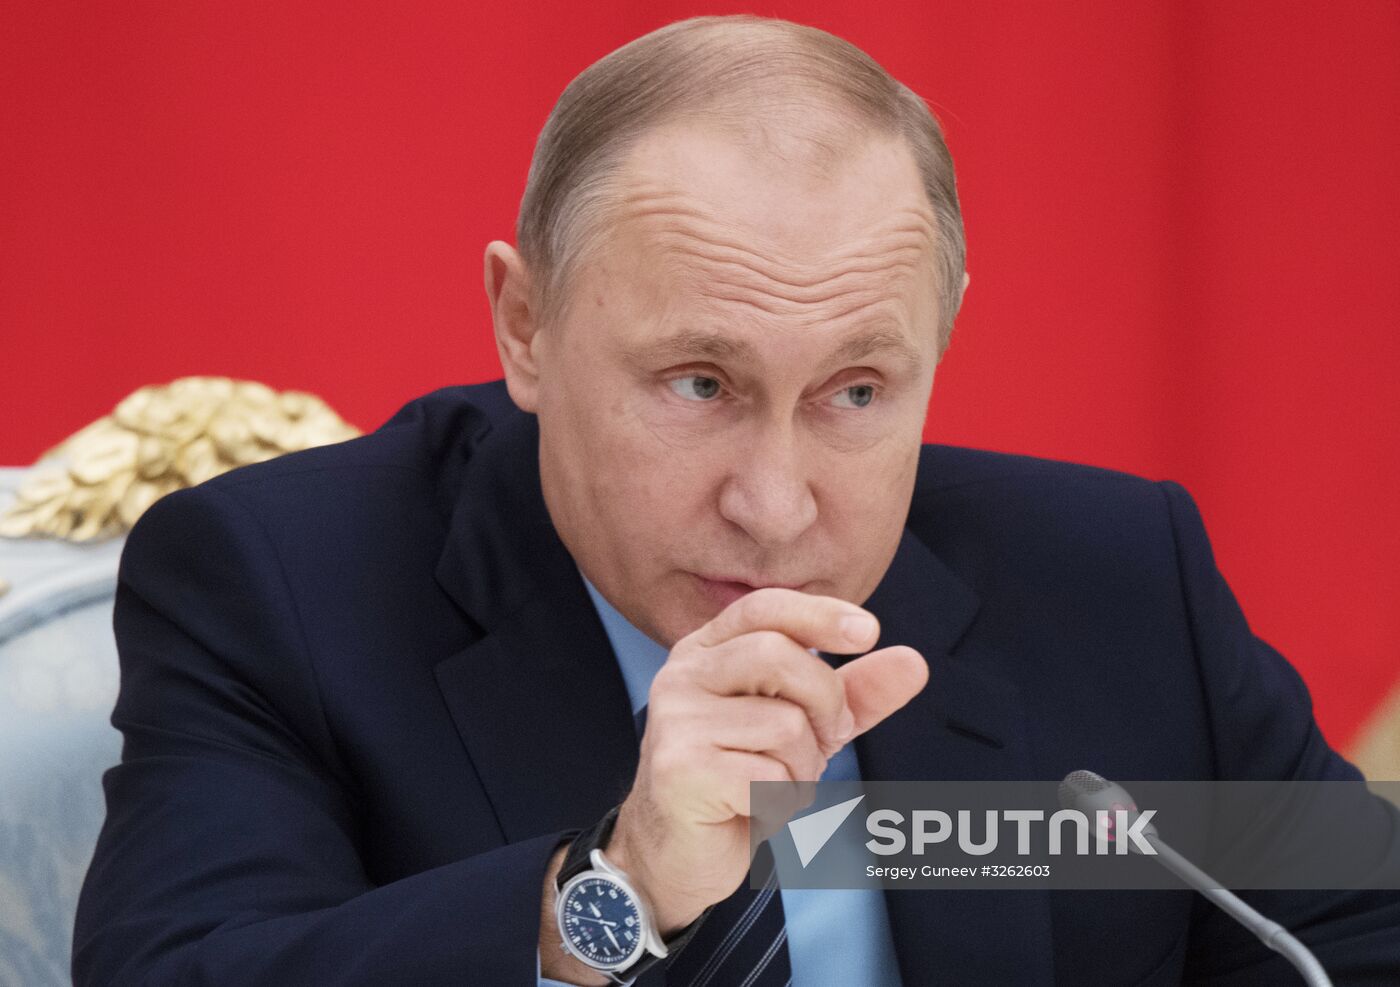 President Vladimir Putin holds meeting with representatives of Russian business community